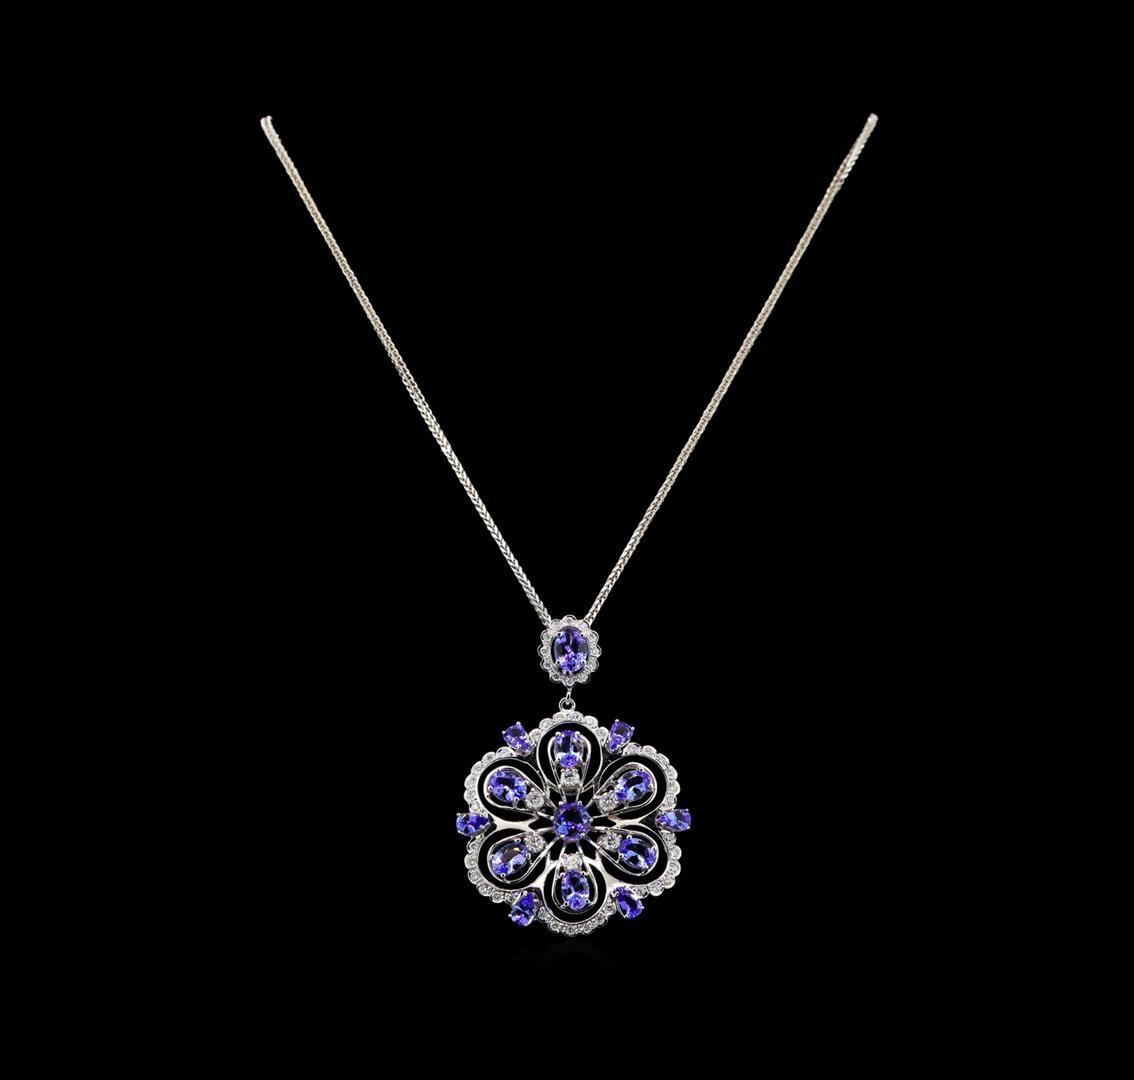 14KT White Gold 8.42 ctw Tanzanite and Diamond Pendant With Chain